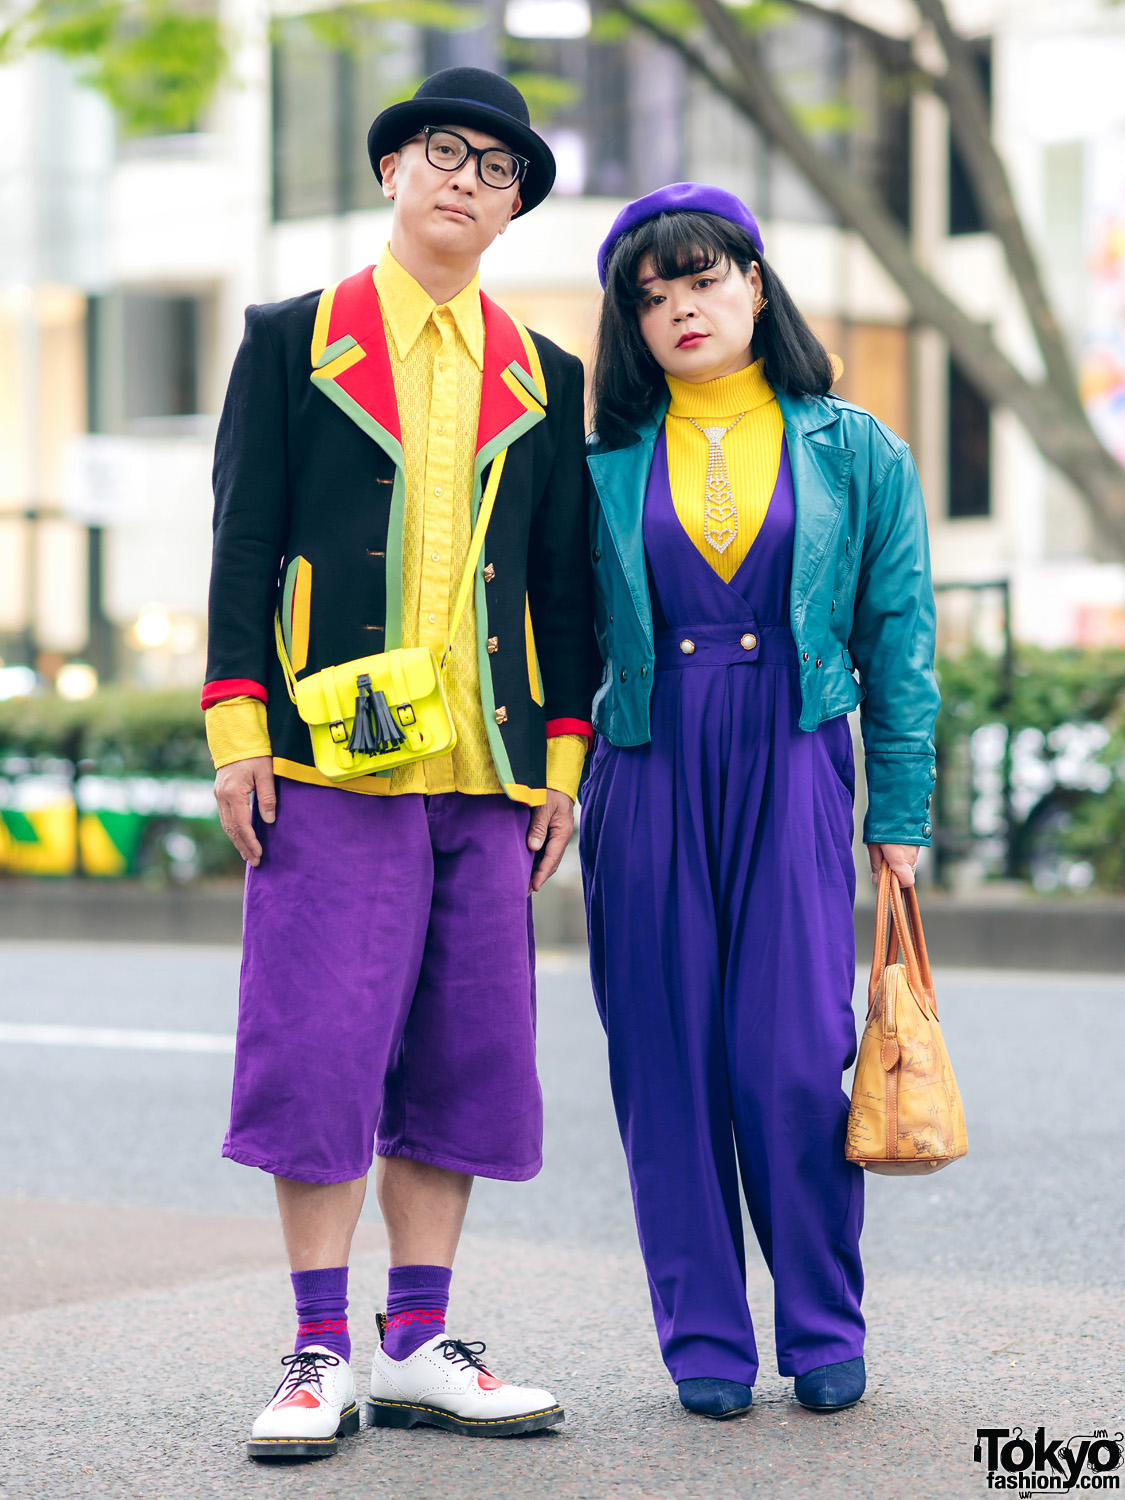 Harajuku Couple in Colorblock Street Styles w/ Bowler Hat, Punk Cake, Cross Colours Denim Shorts, Dr. Martens Loafers, Kinji & Sometimes Store Denim Boots